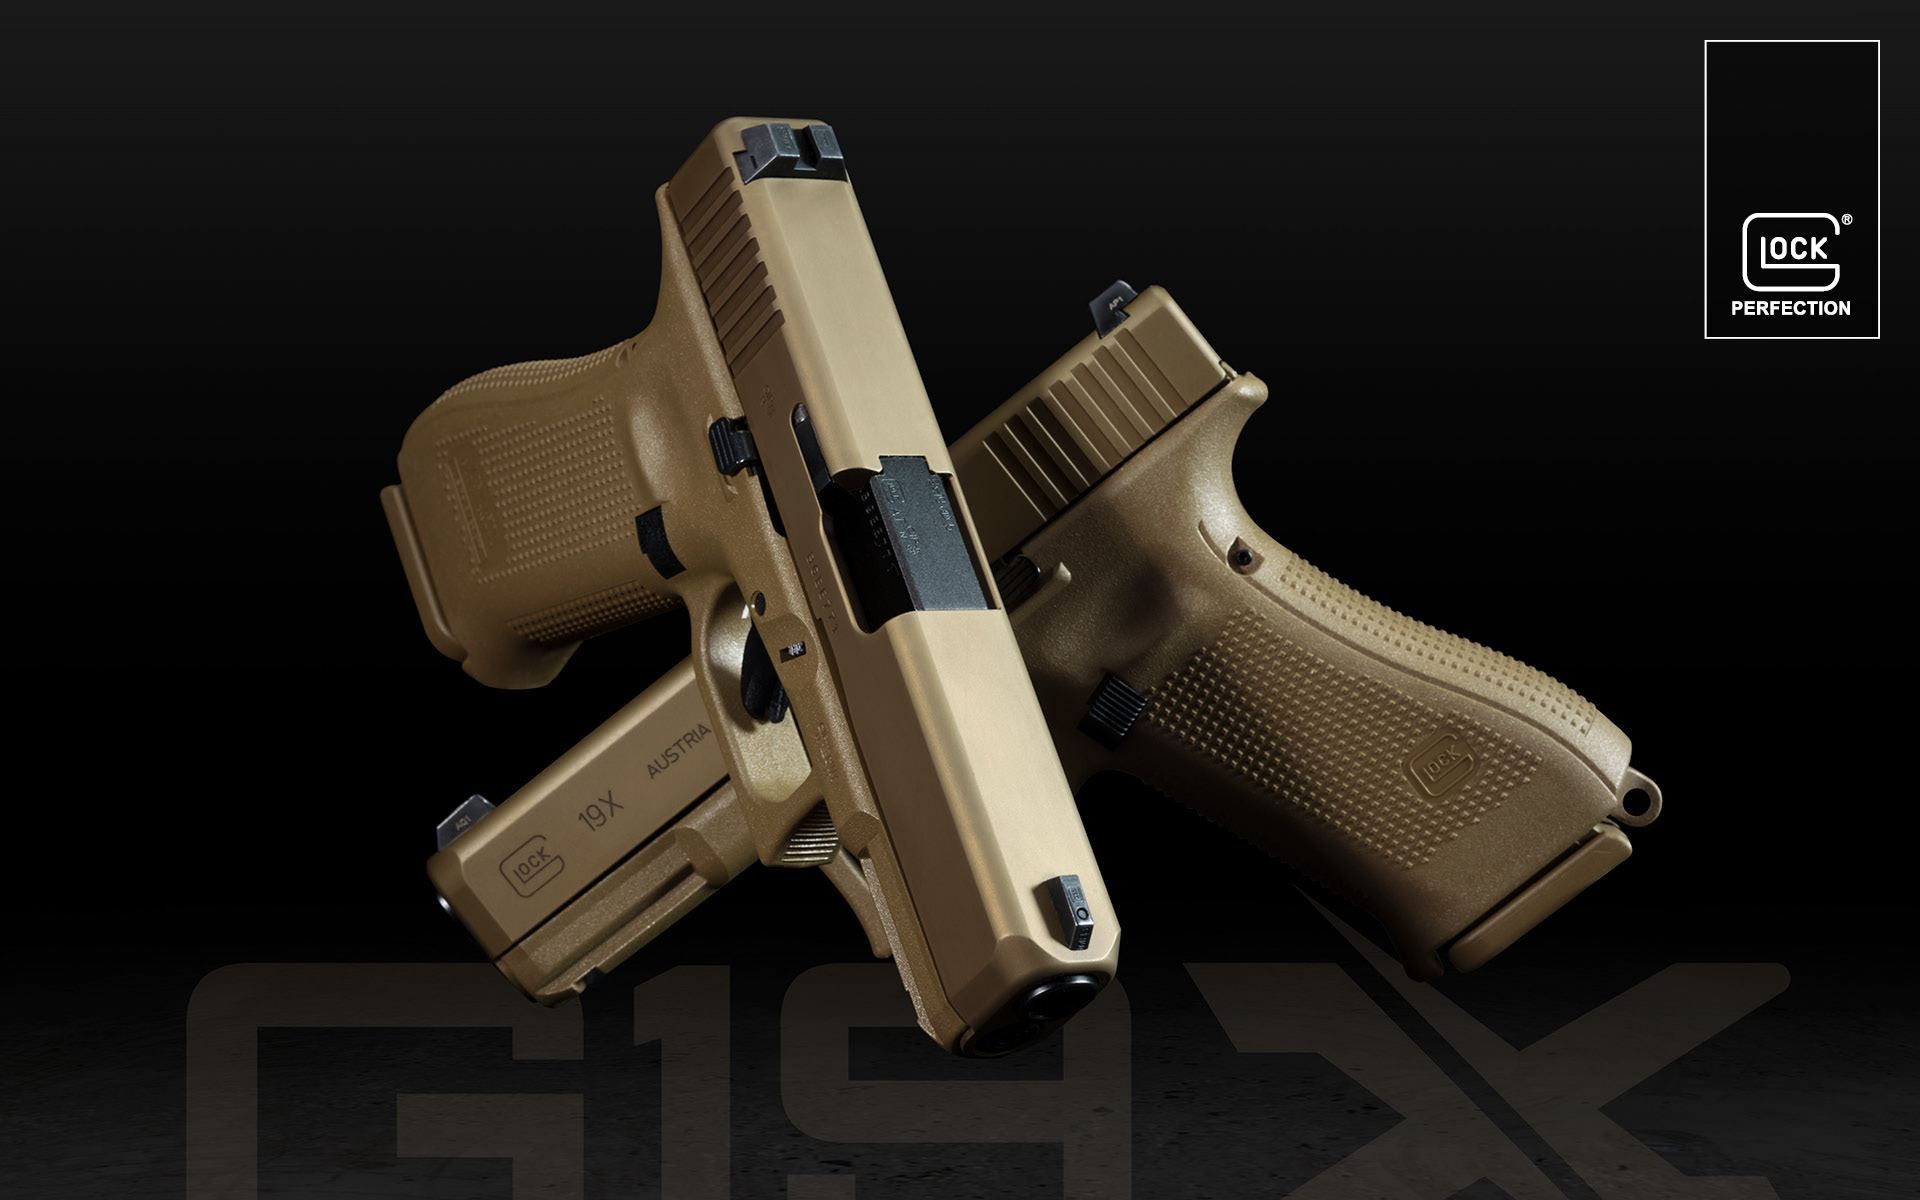 Glock Perfection Download Area Images, Photos, Reviews